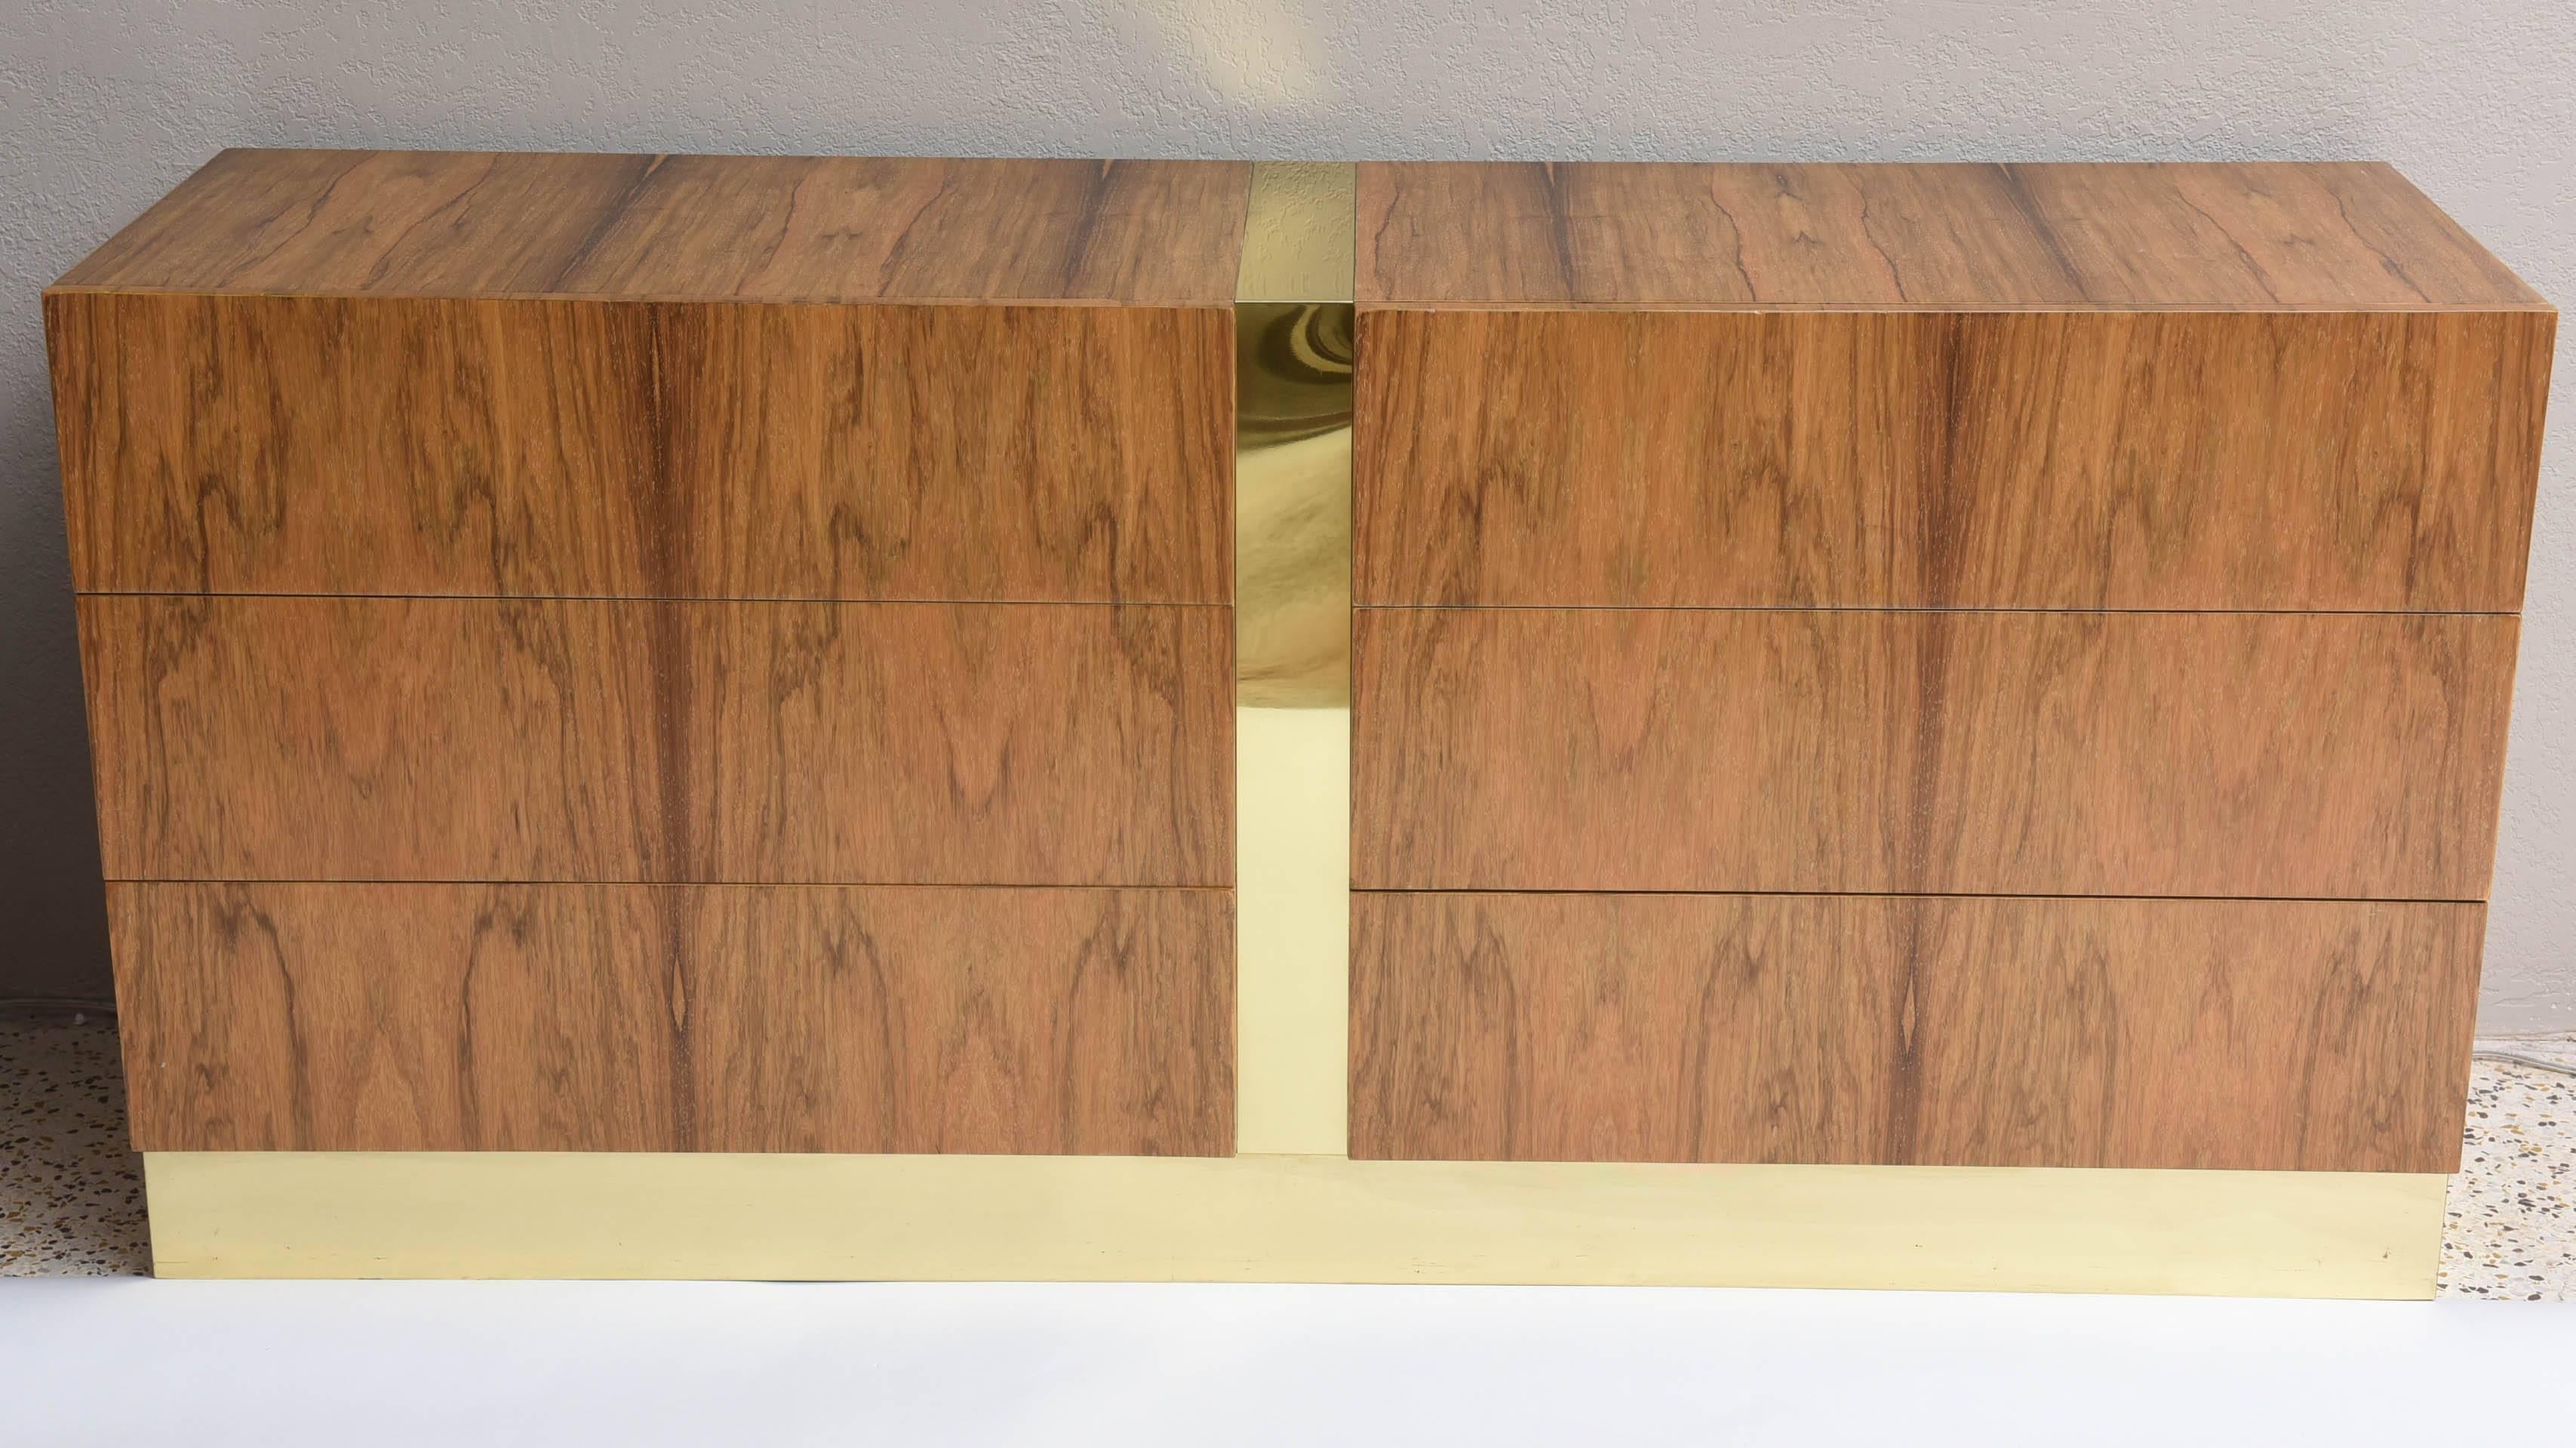 Sleek and low six-drawer bleached rosewood dresser with brass detailing by Milo Baughman for Thayer Coggin.